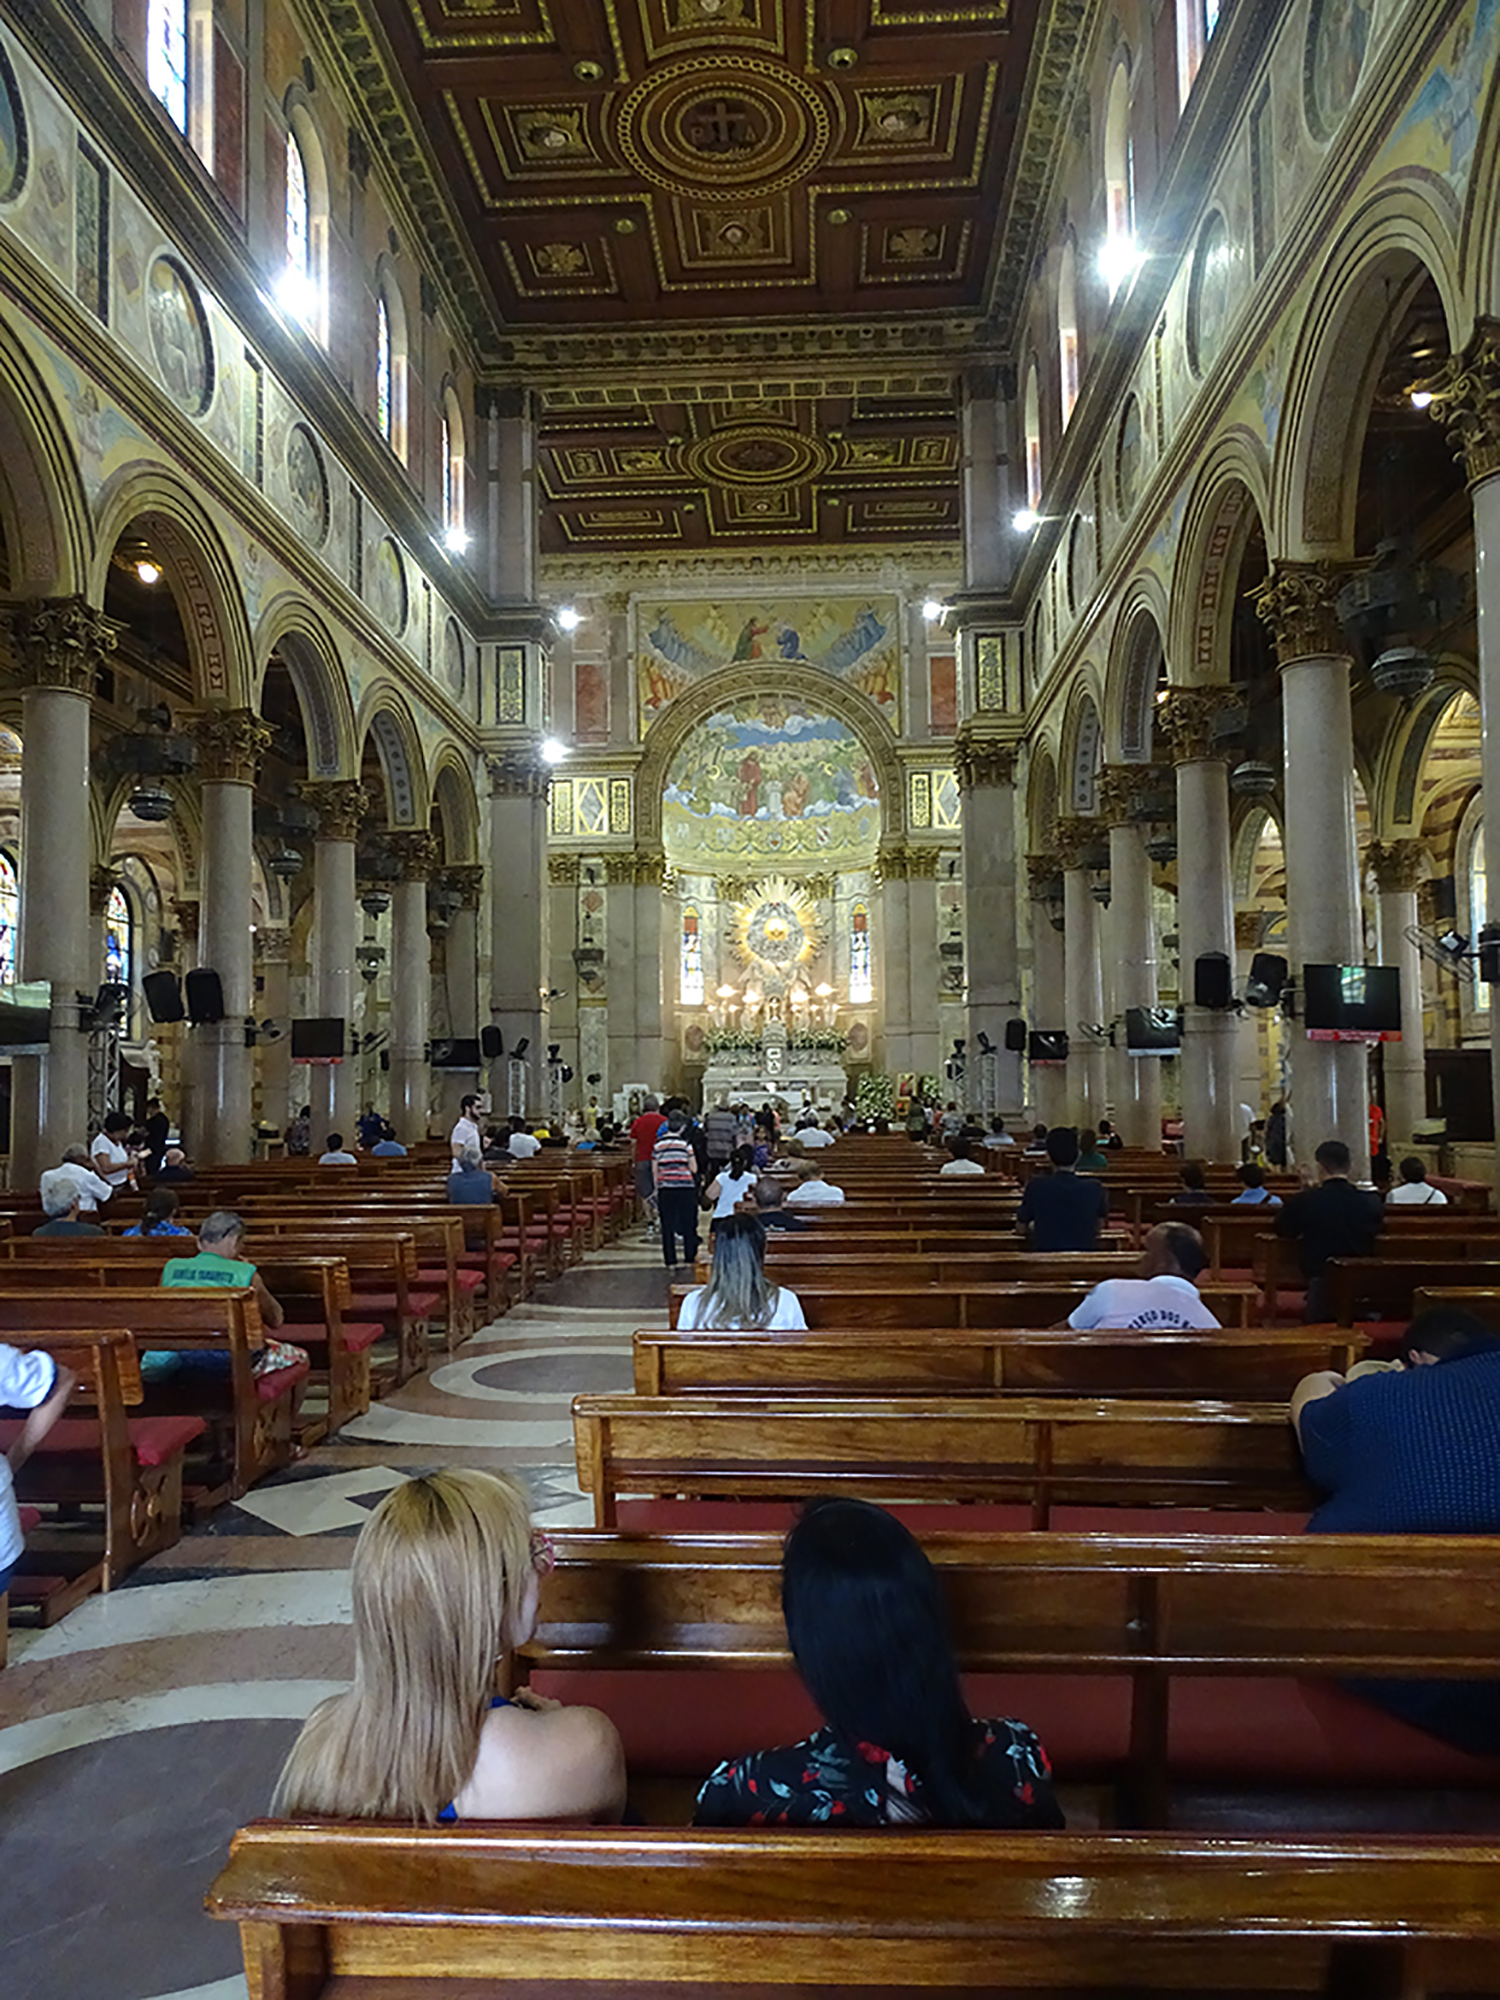 Inside the basilica where the statue resides